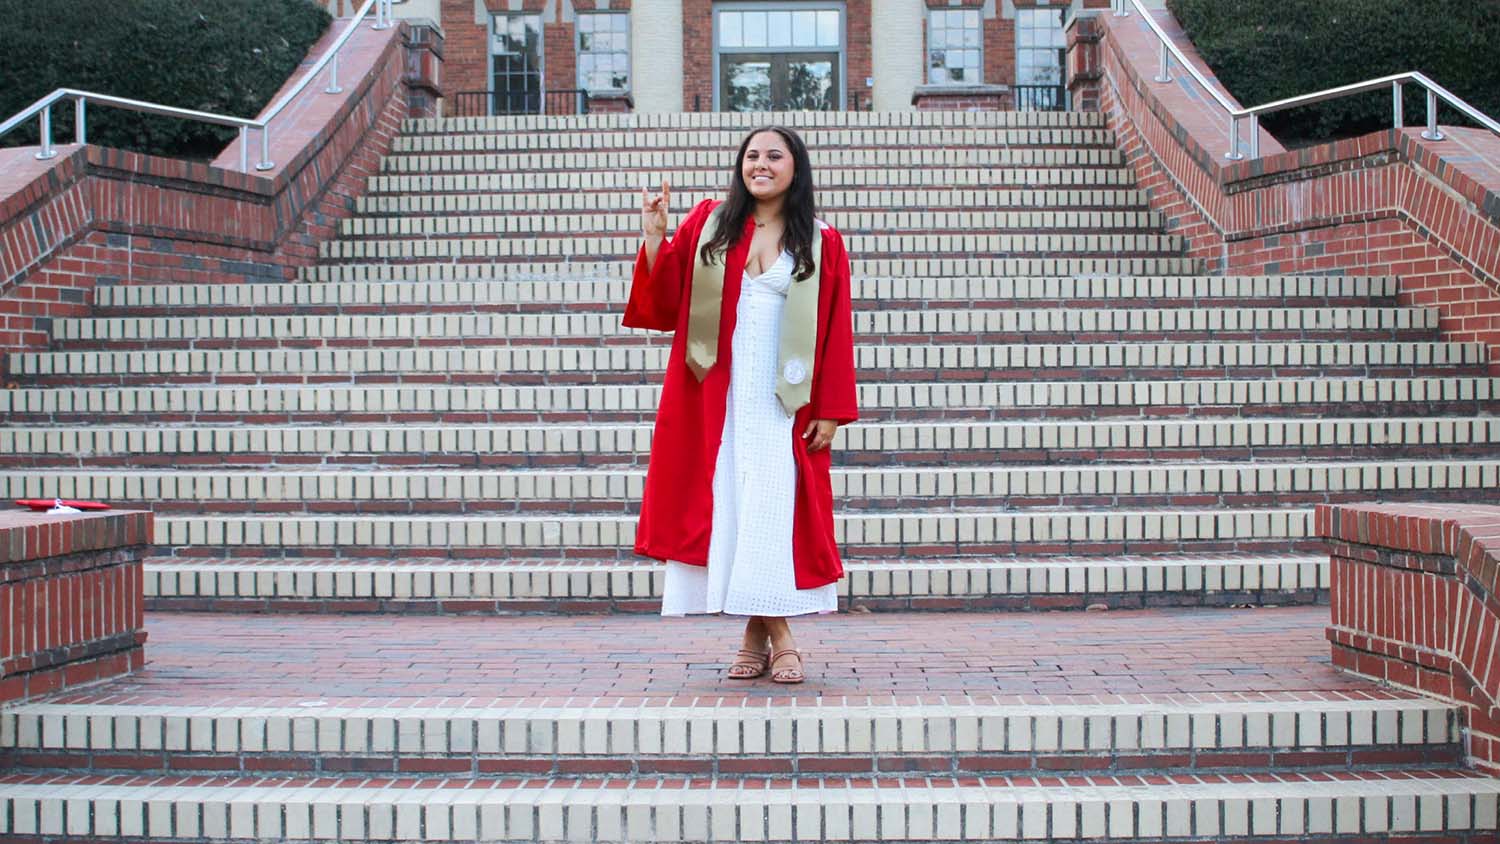 a woman wearing a red graduation gown stands on brick stairs